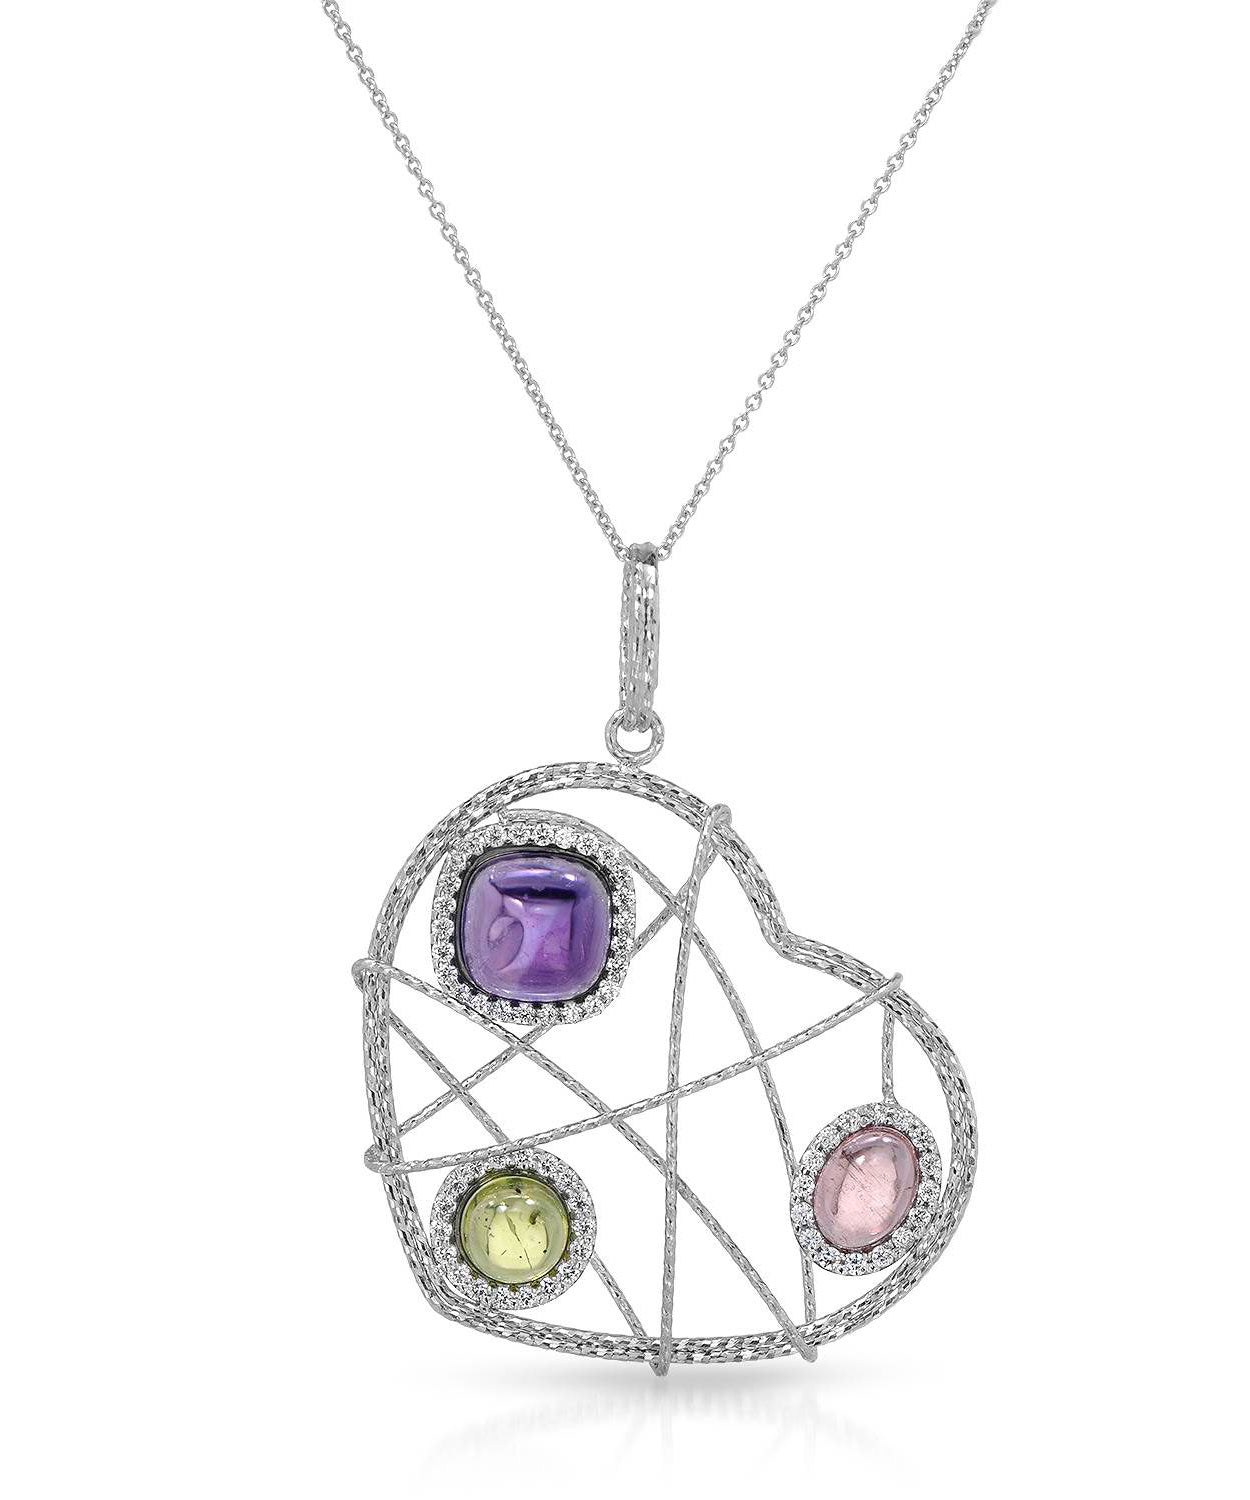 Abstract Collection 3.30ctw Natural Amethyst, Peridot, Tourmaline and Cubic Zirconia 14k Gold Heart Pendant With Chain - Made in Italy View 1